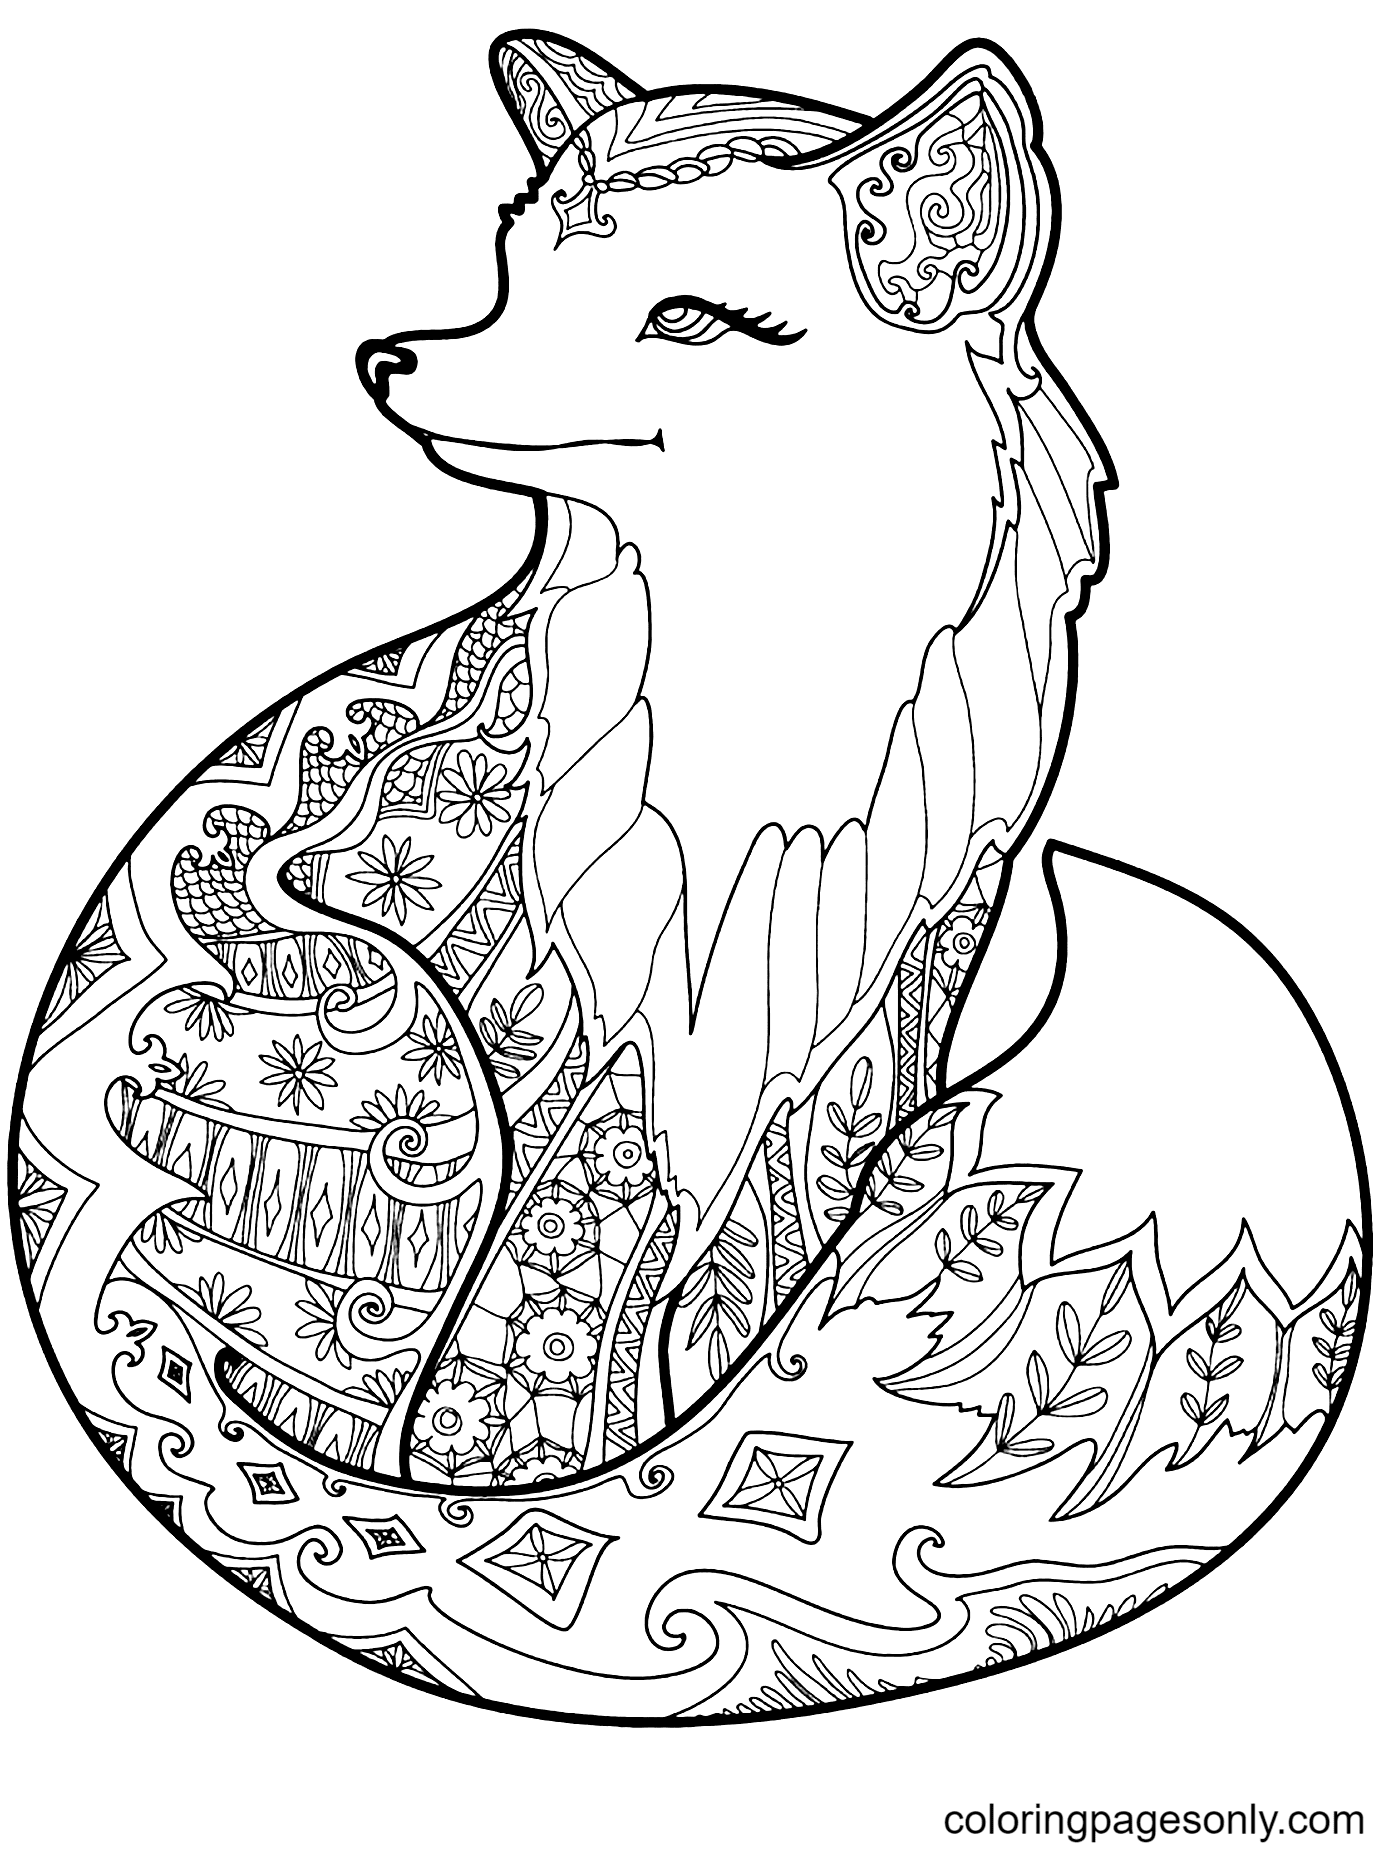 Fox with Beautiful Patterns Coloring Page